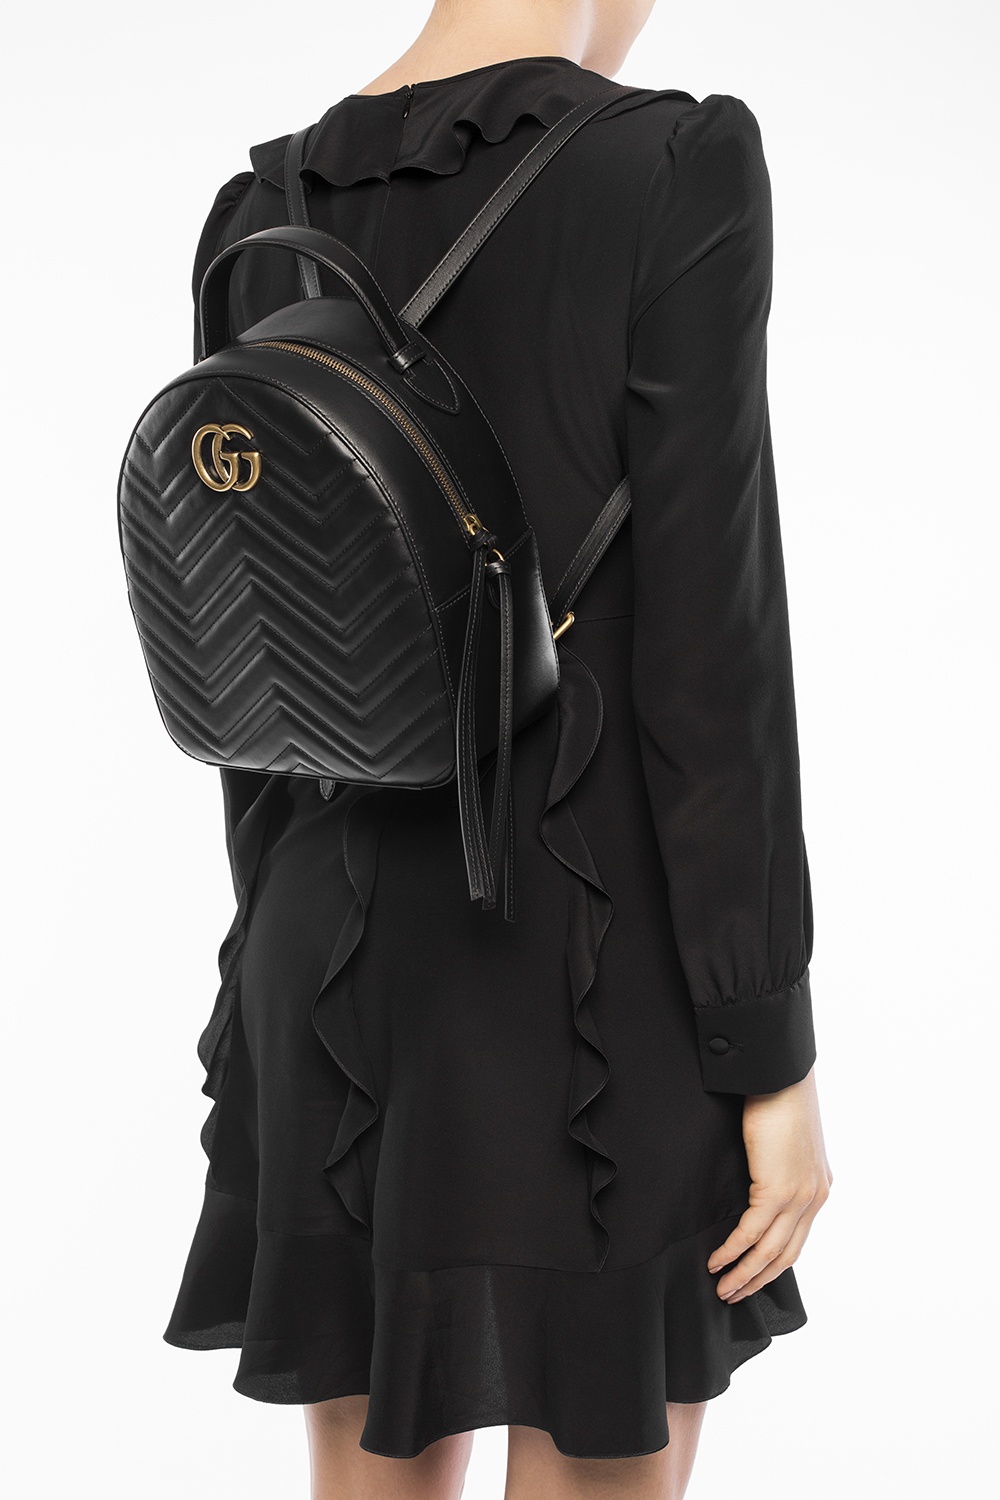 BALO NỮ GUCCI MARMONT BACKPACK 11